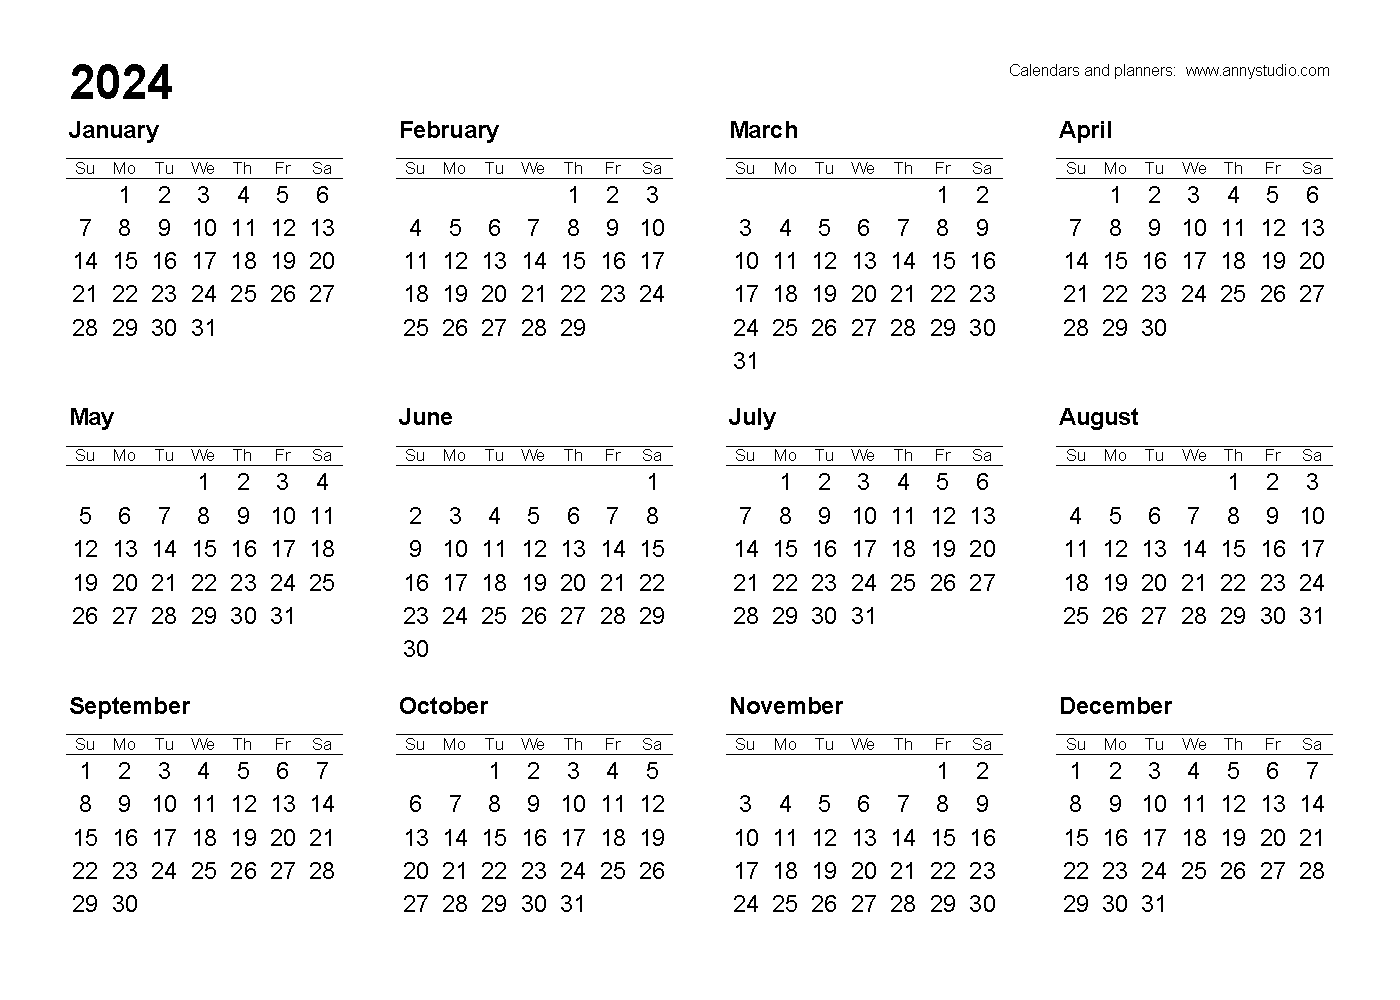 Free Printable Calendars And Planners 2024, 2025 And 2026 with regard to Free Printable Calendar 2024 Horizontal